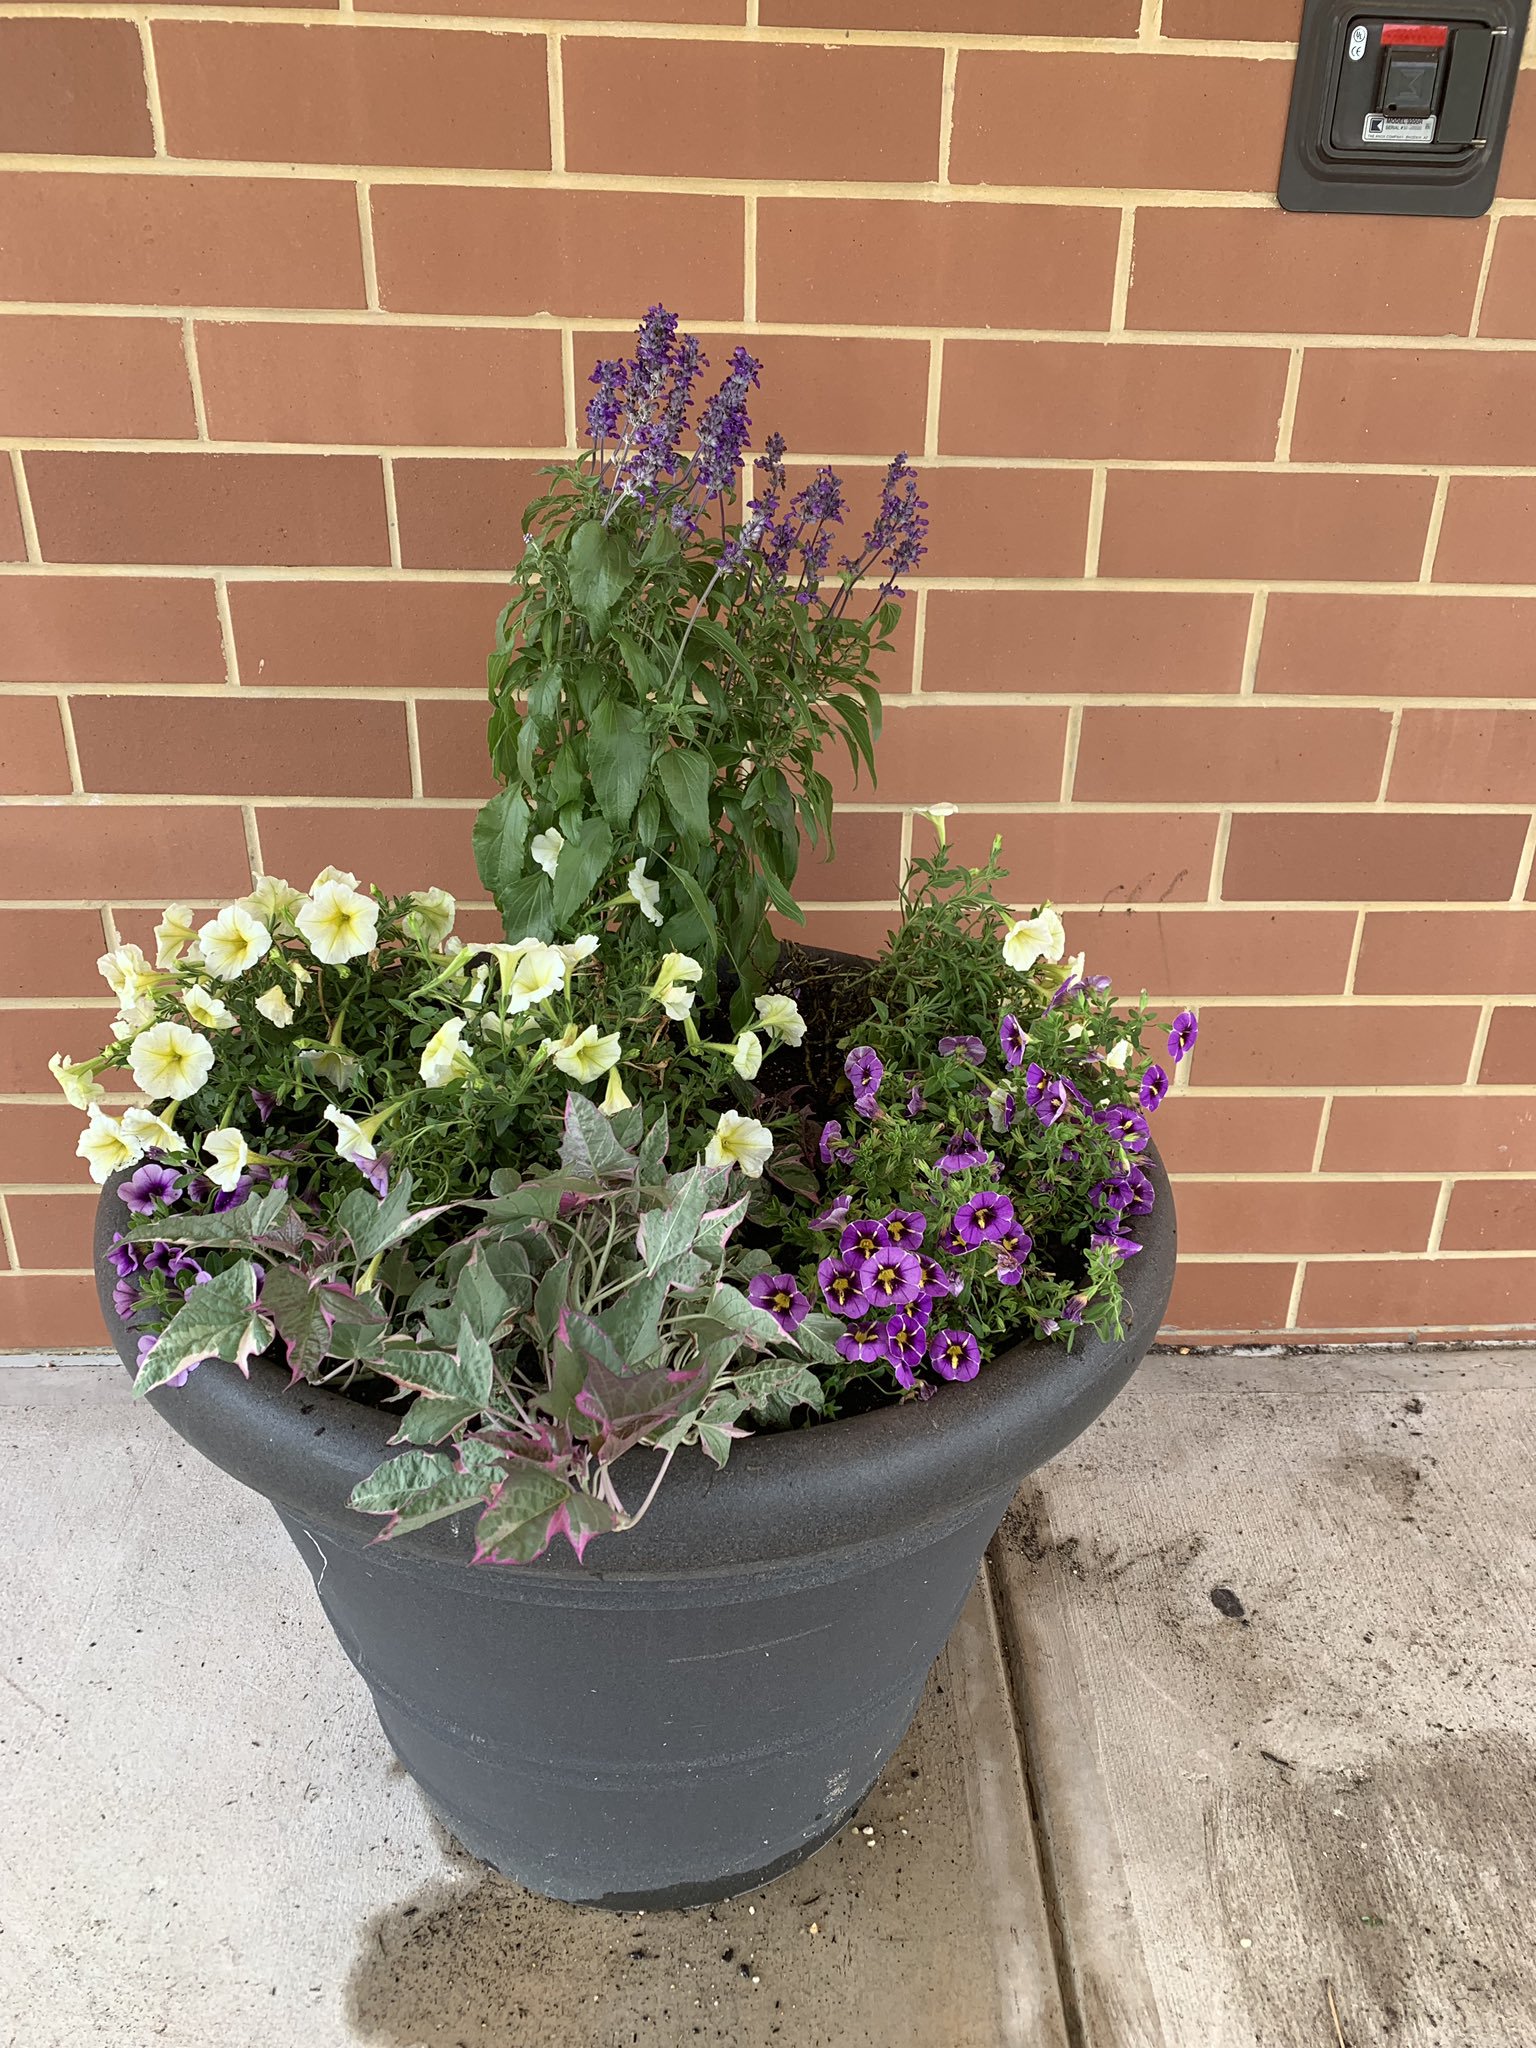 Flower pot filled with purple, yellow, and green flowers.